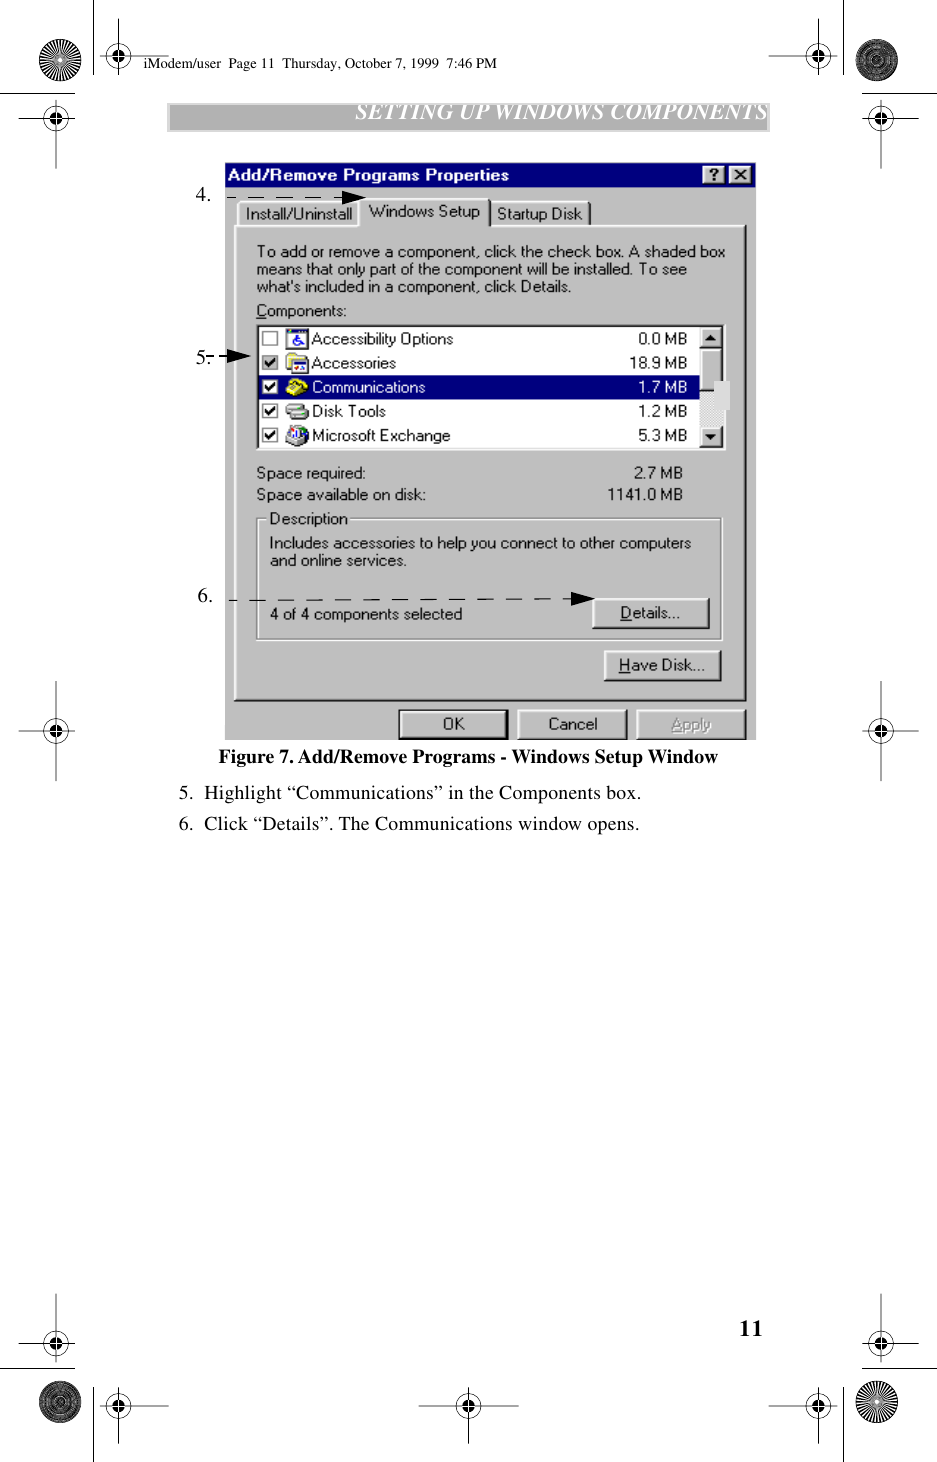  11    SETTING UP WINDOWS COMPONENTS Figure 7. Add/Remove Programs - Windows Setup Window   5.  Highlight “Communications” in the Components box.  6.  Click “Details”. The Communications window opens.4. 5. 6. iModem/user  Page 11  Thursday, October 7, 1999  7:46 PM